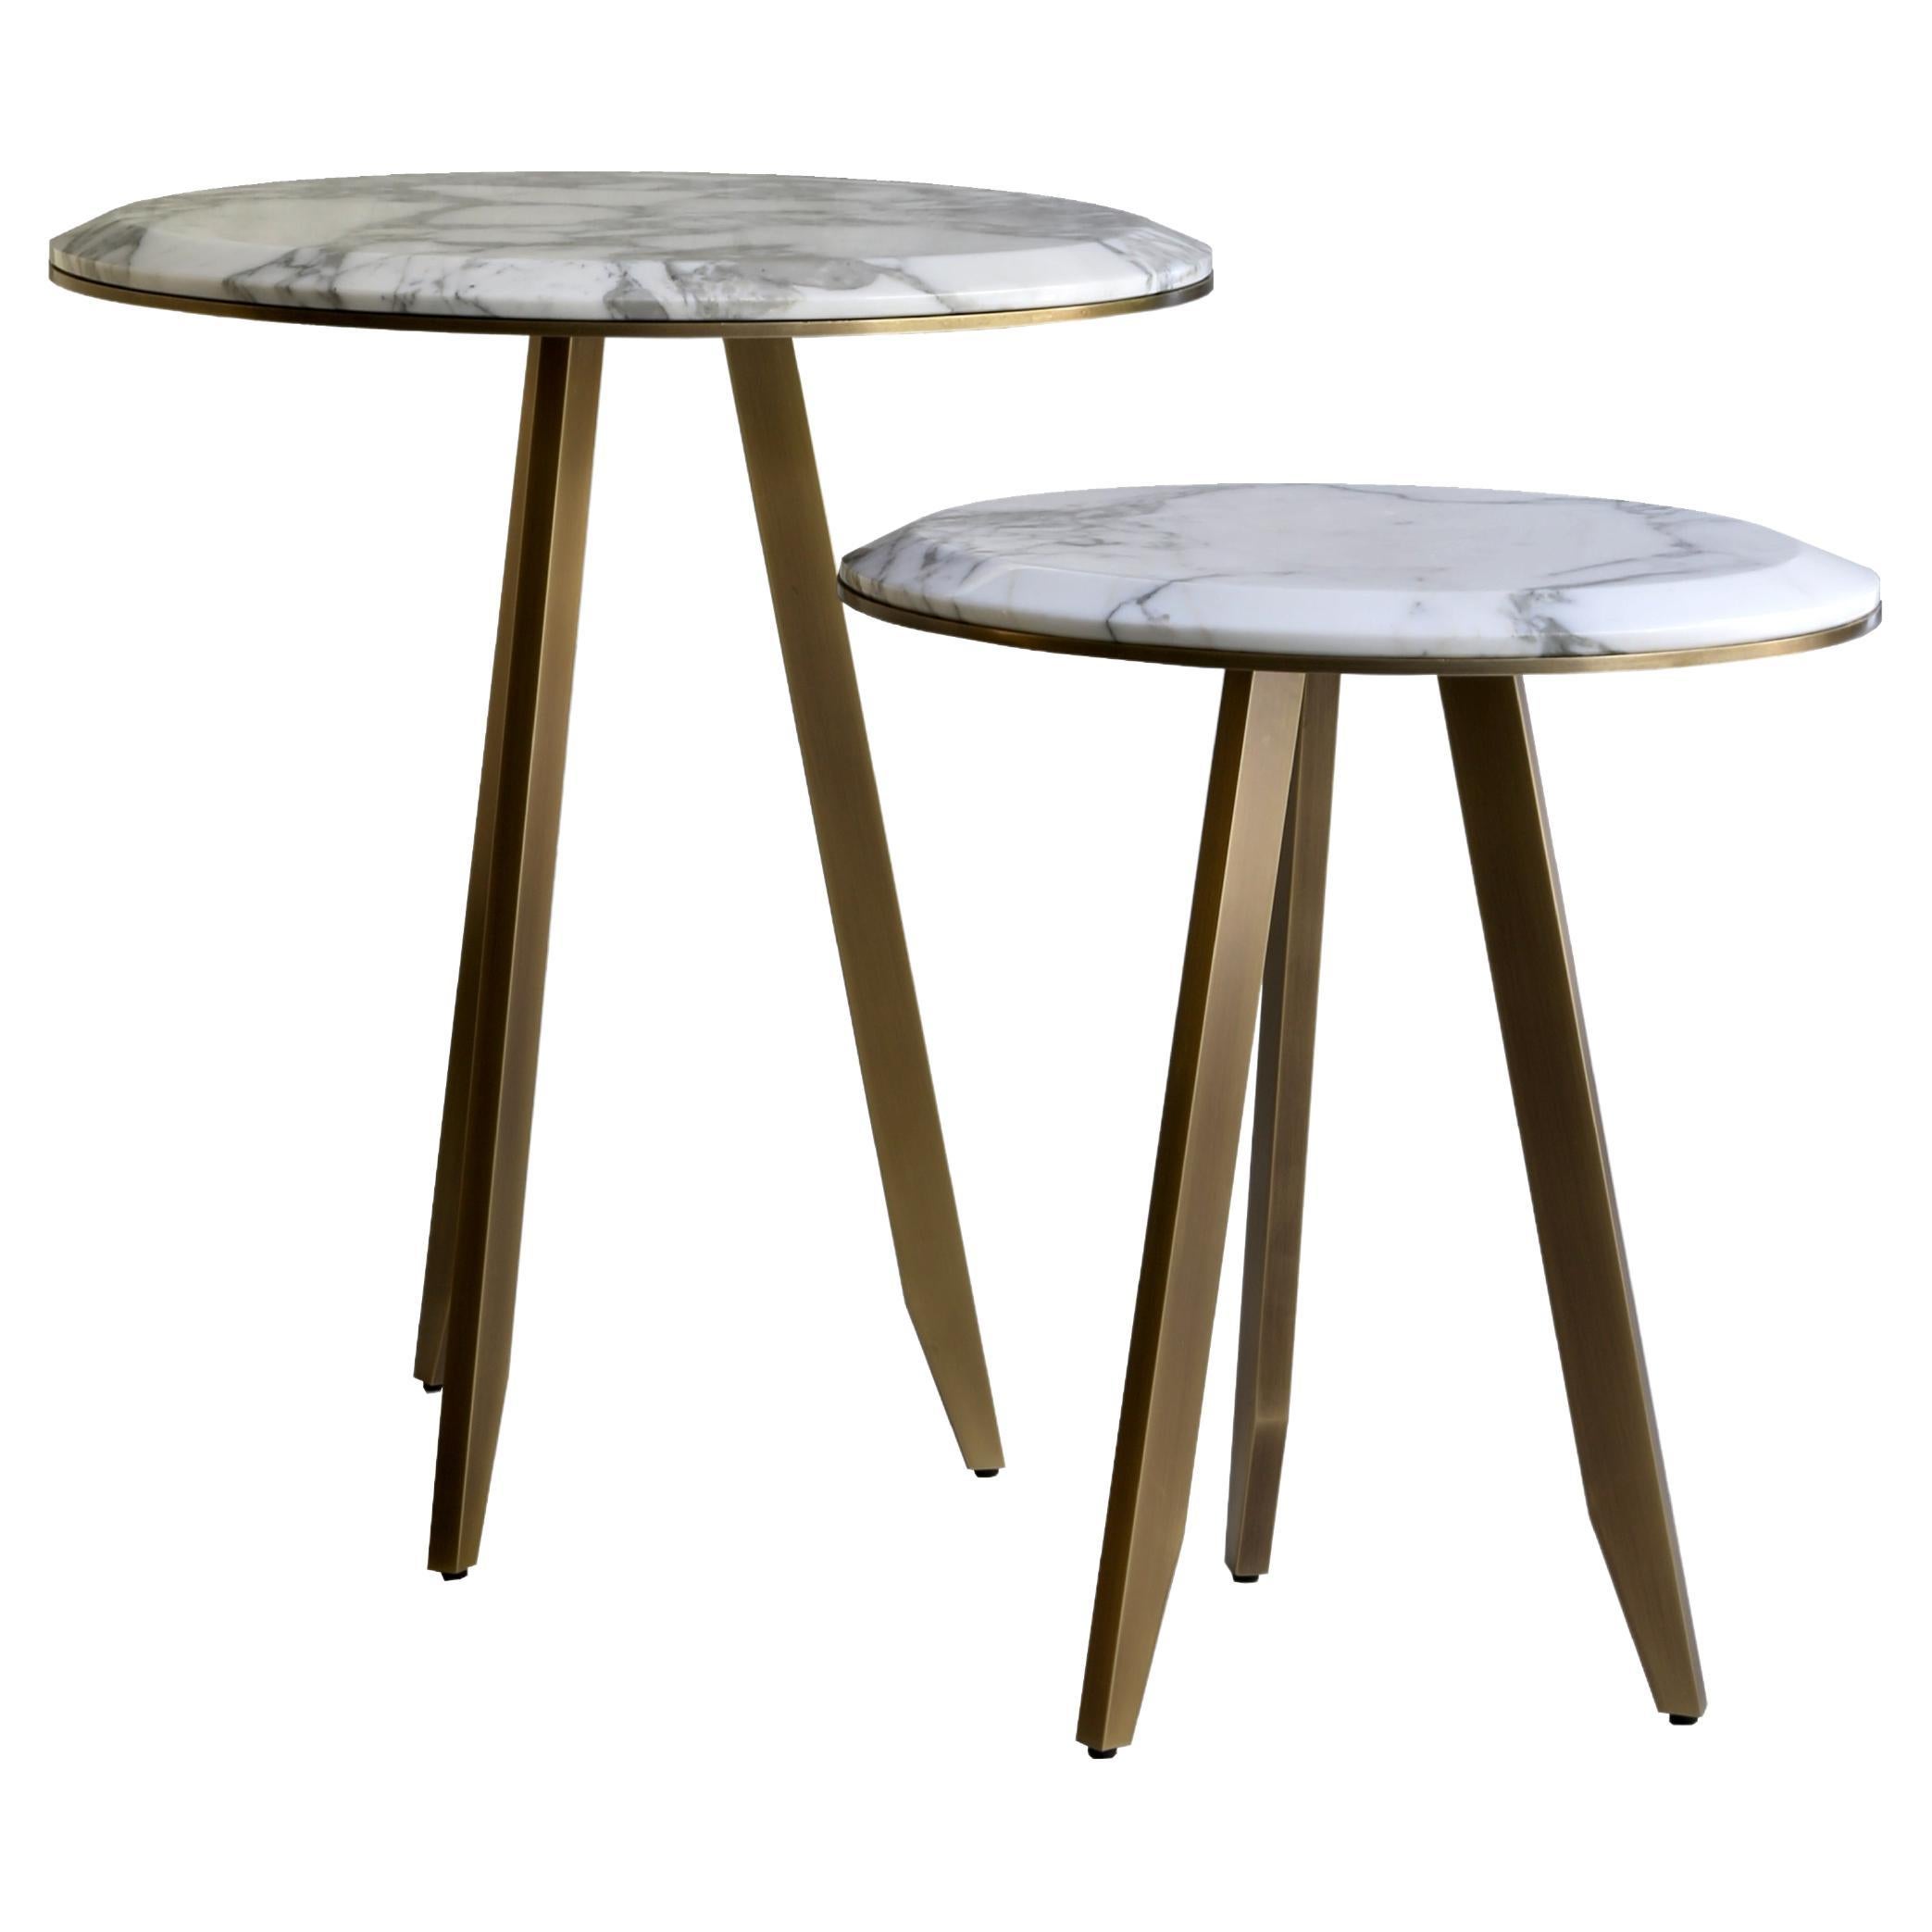 Mirage, a couple of Side Tables in Marble or Onyx